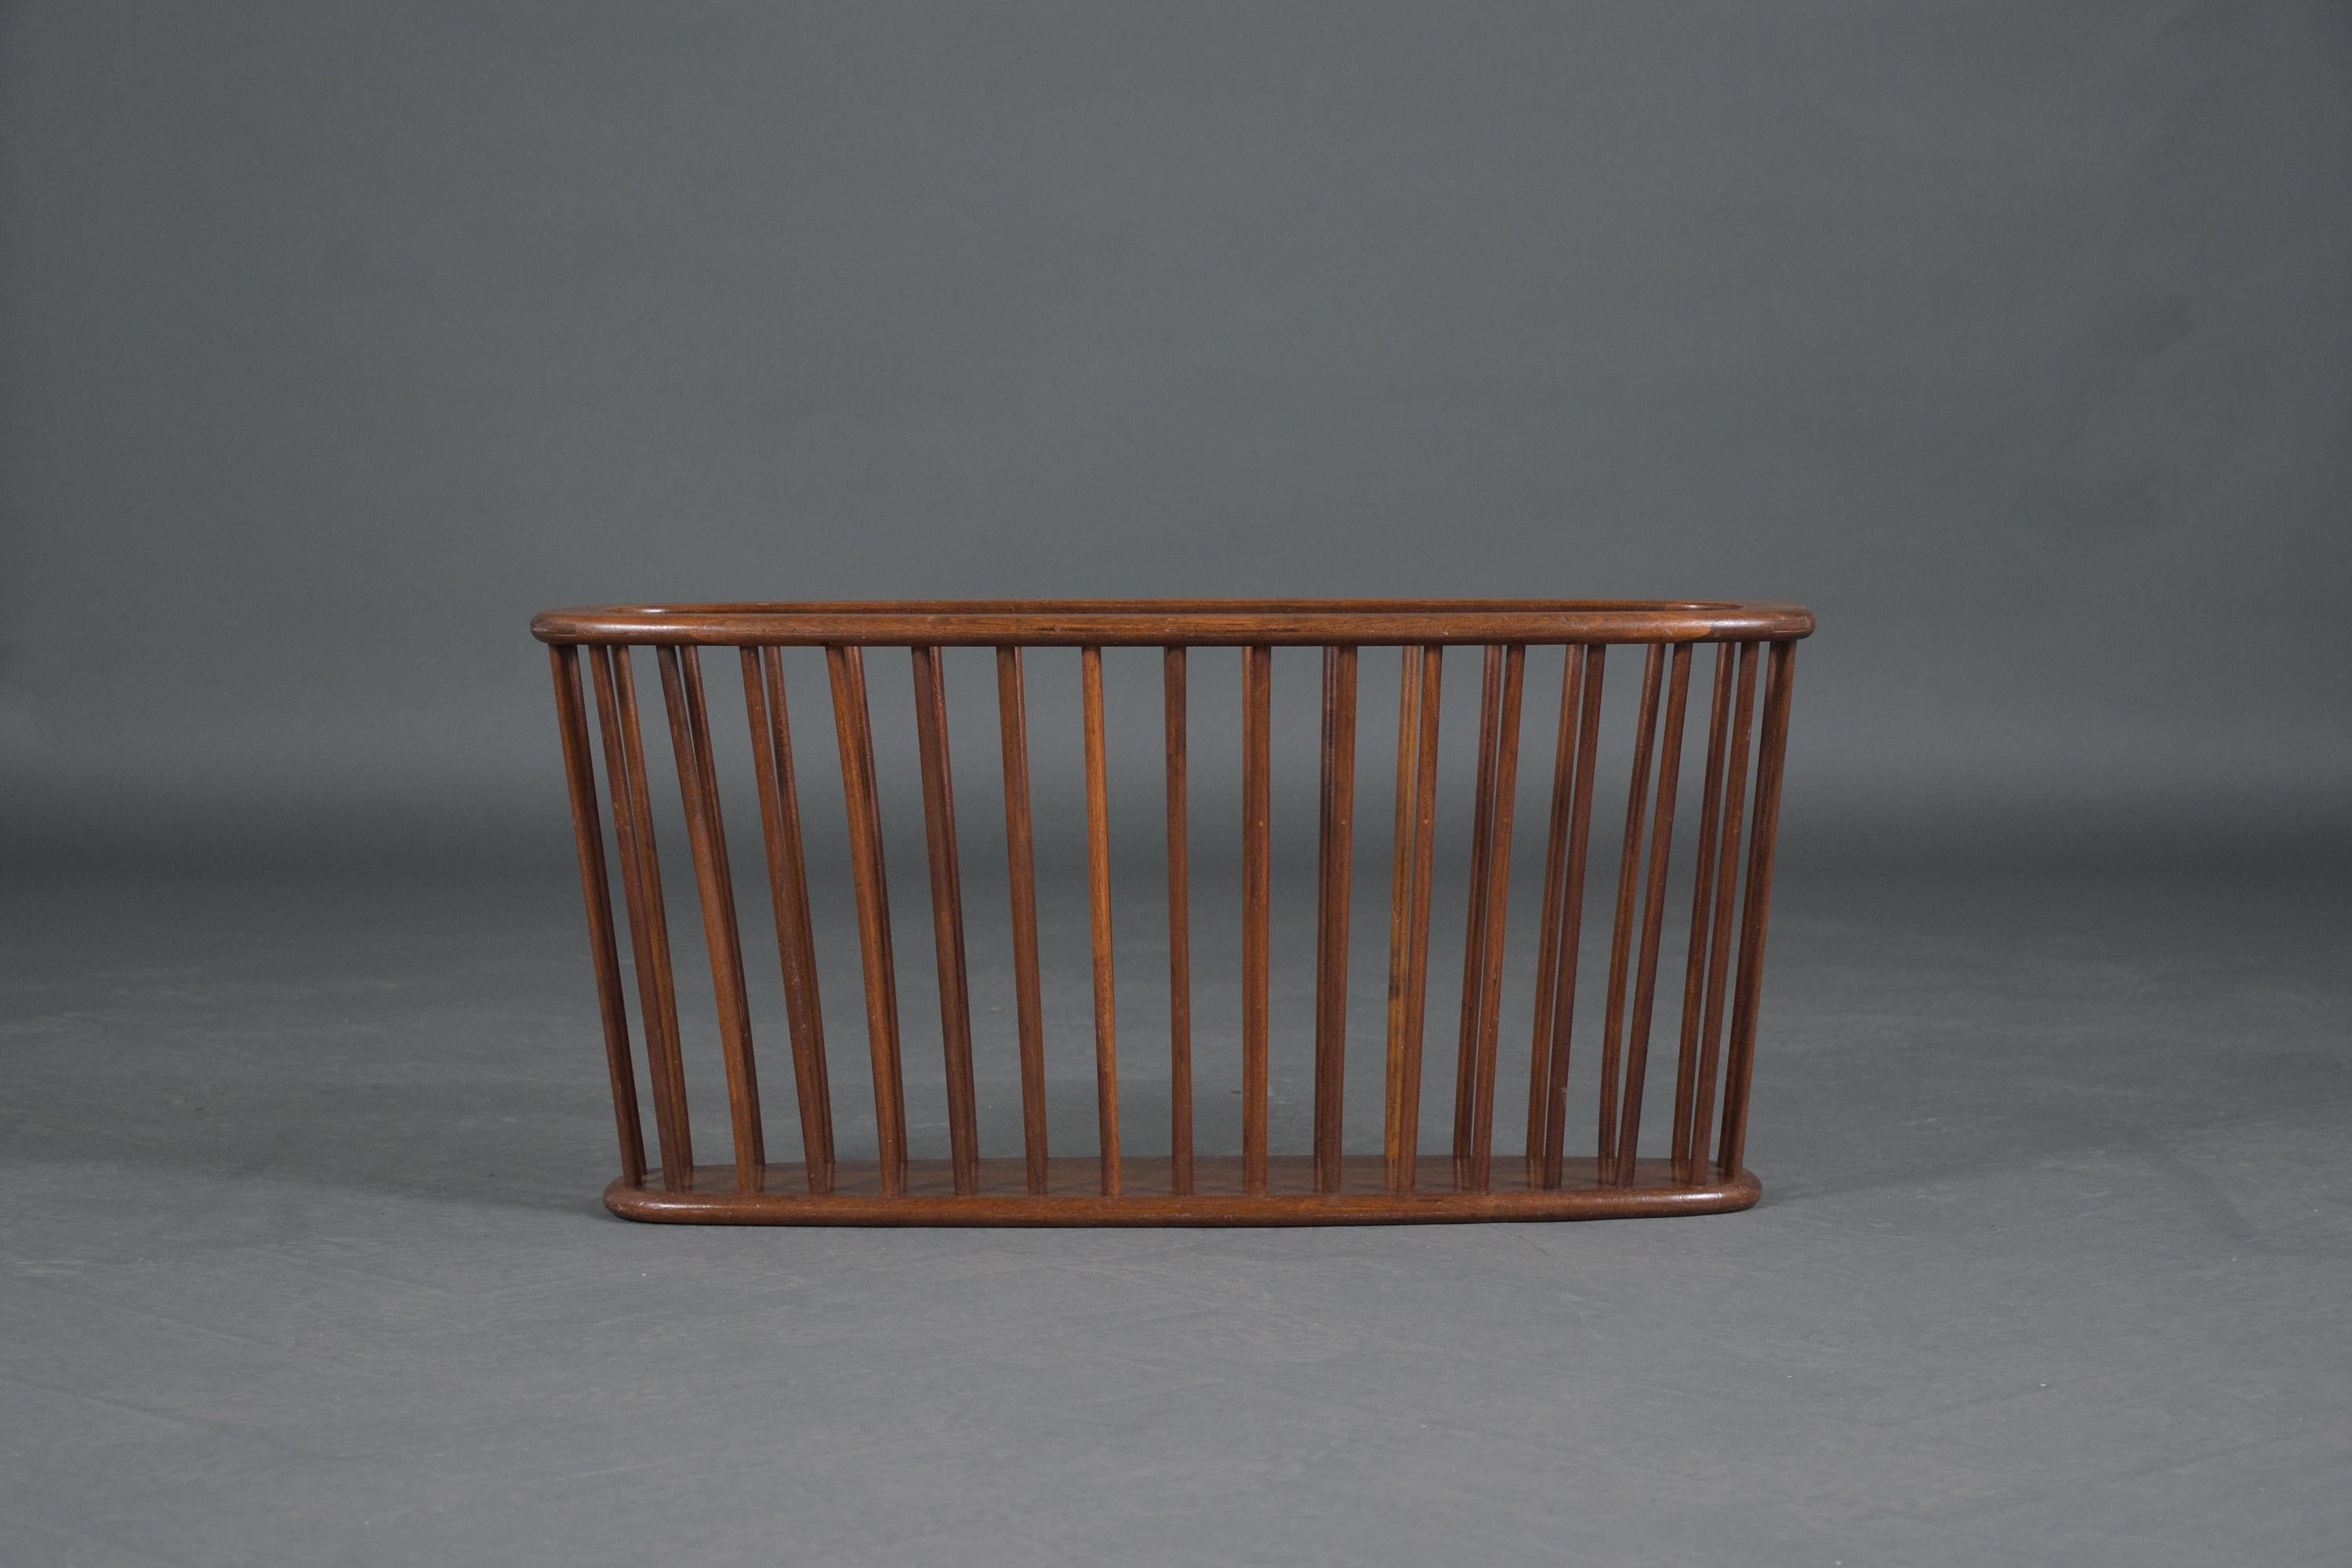 An extraordinary 1950s Arthur Umanoff magazine rack that is in good condition and has been restored by our team of craftsmen. This piece is hand-crafted out of walnut wood features elegant dark walnut color with lacquer finish and an oval shape